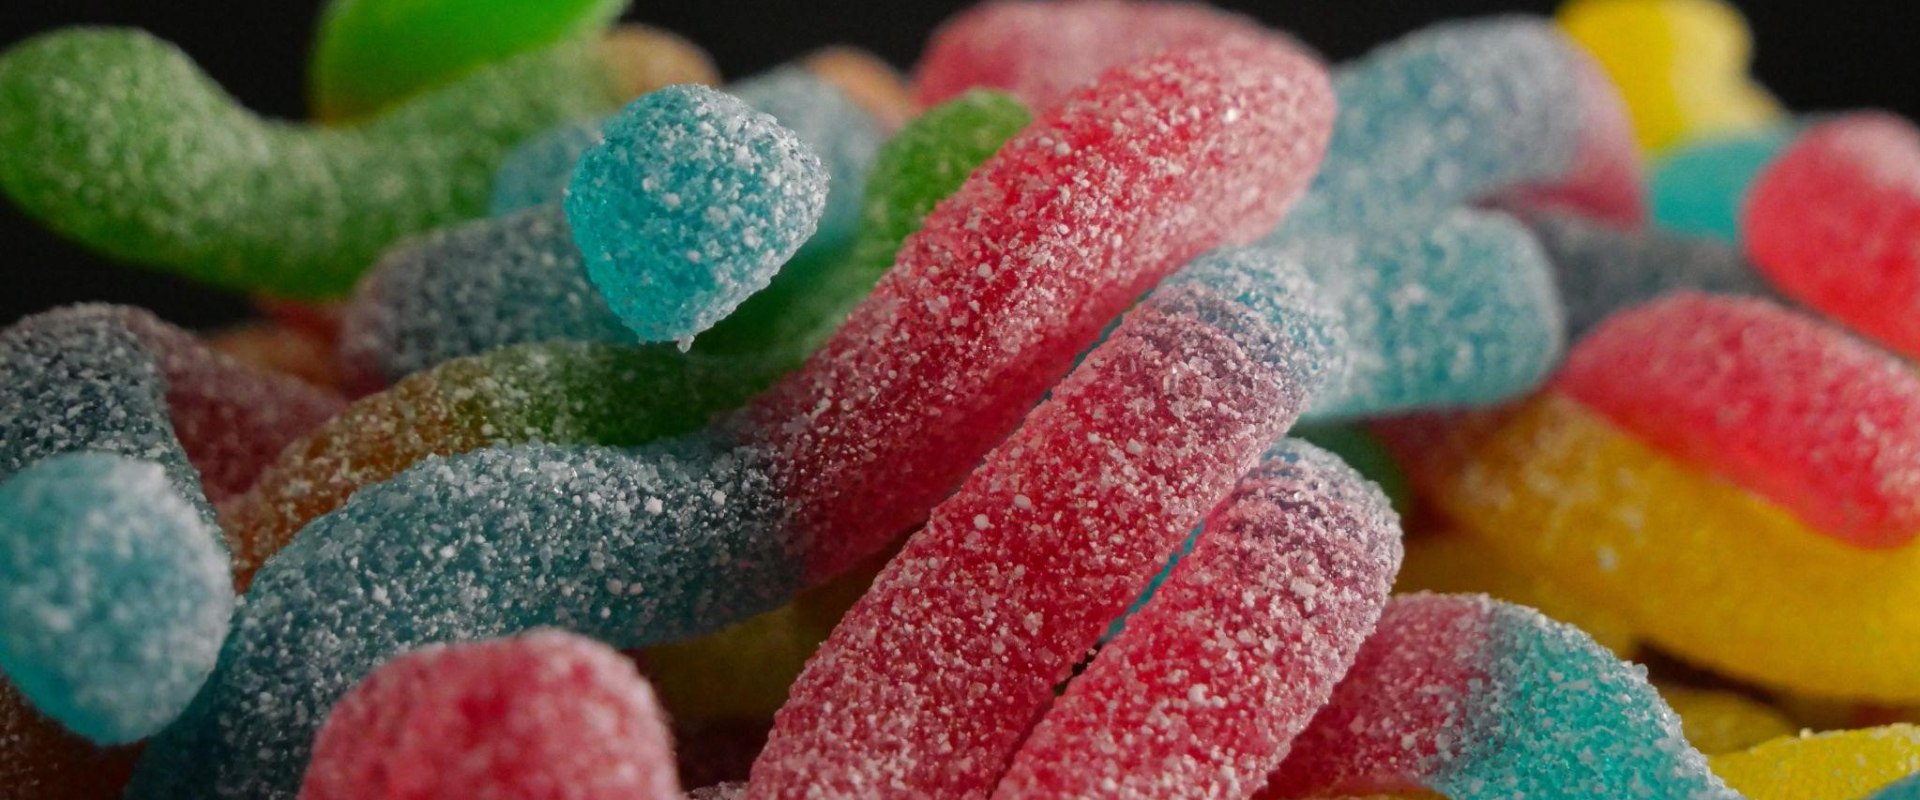 What happens if you take too many delta 9 gummies?